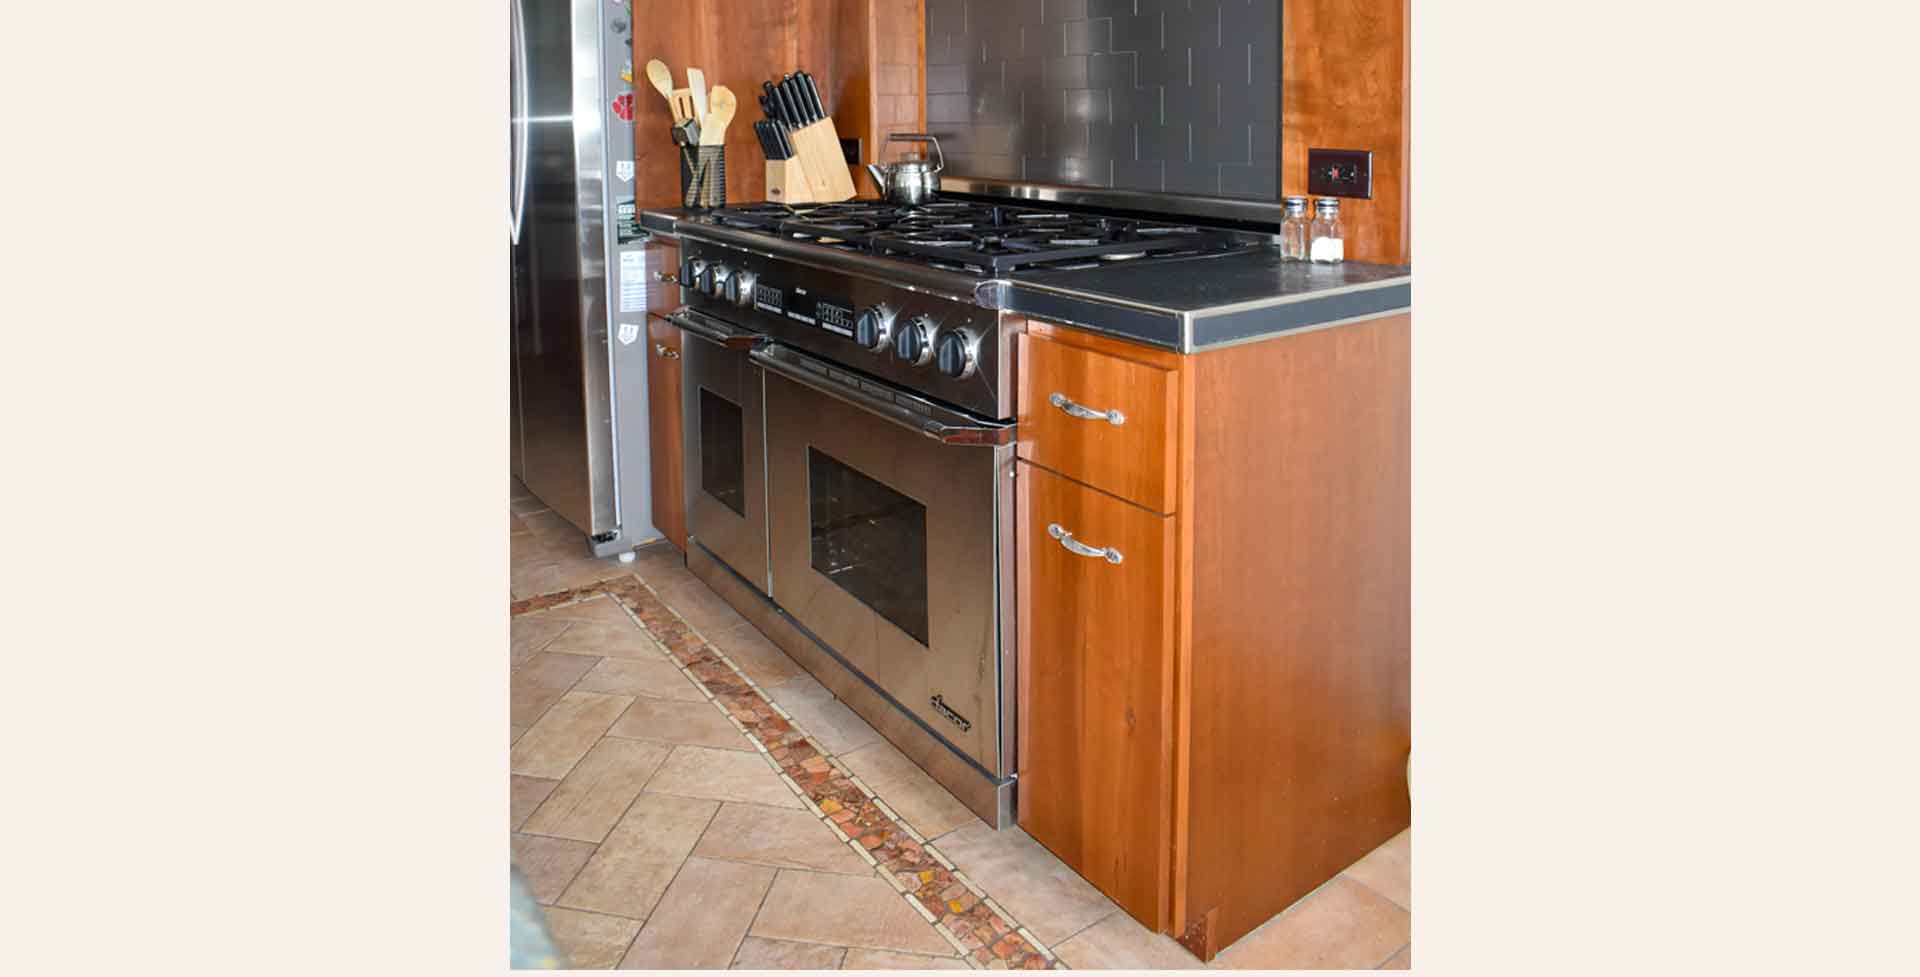 Large six burner stove with two ovens